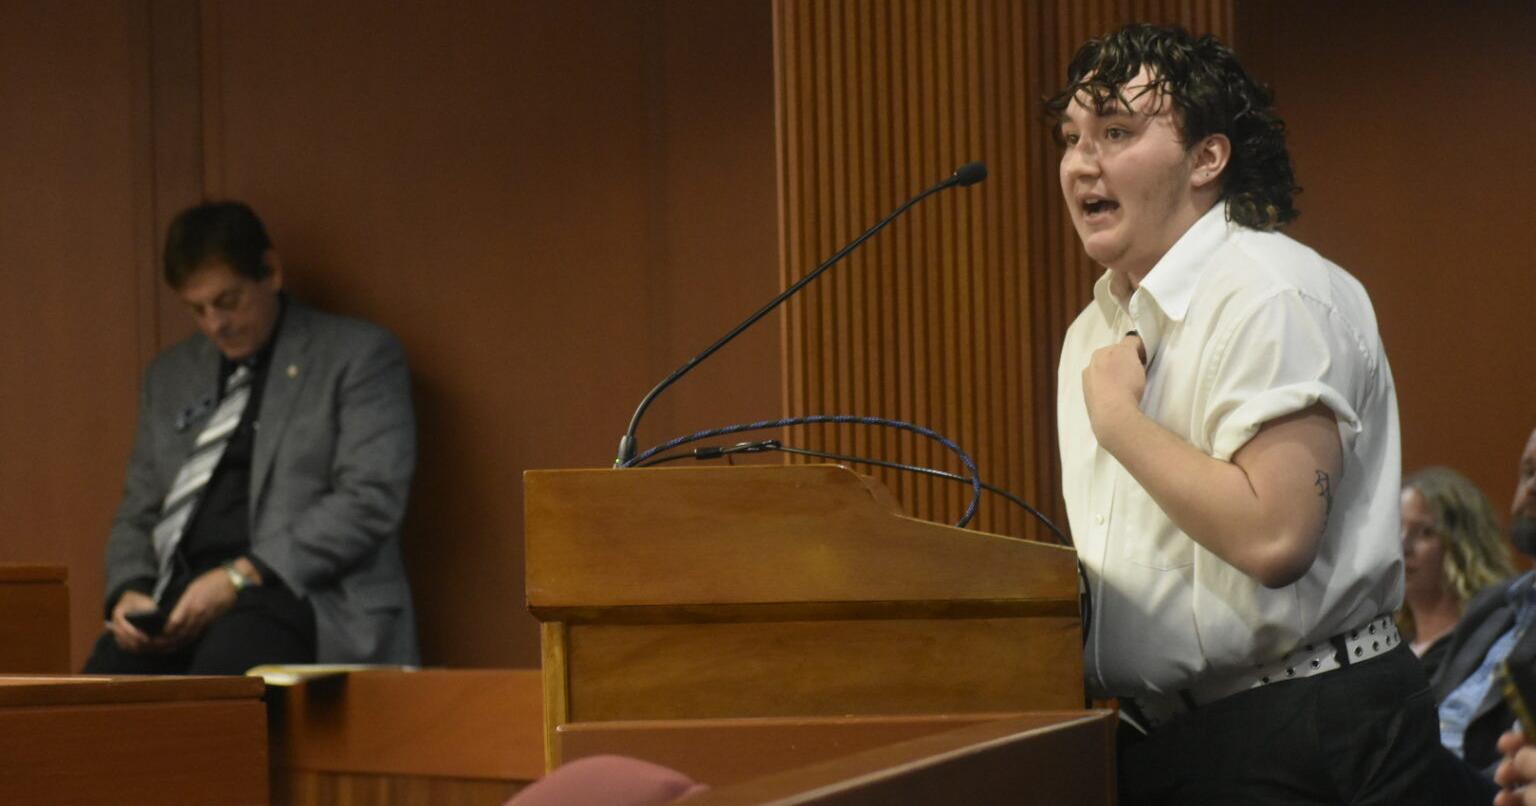 Emotions run high as House panel advances bill limiting transgender care for minors